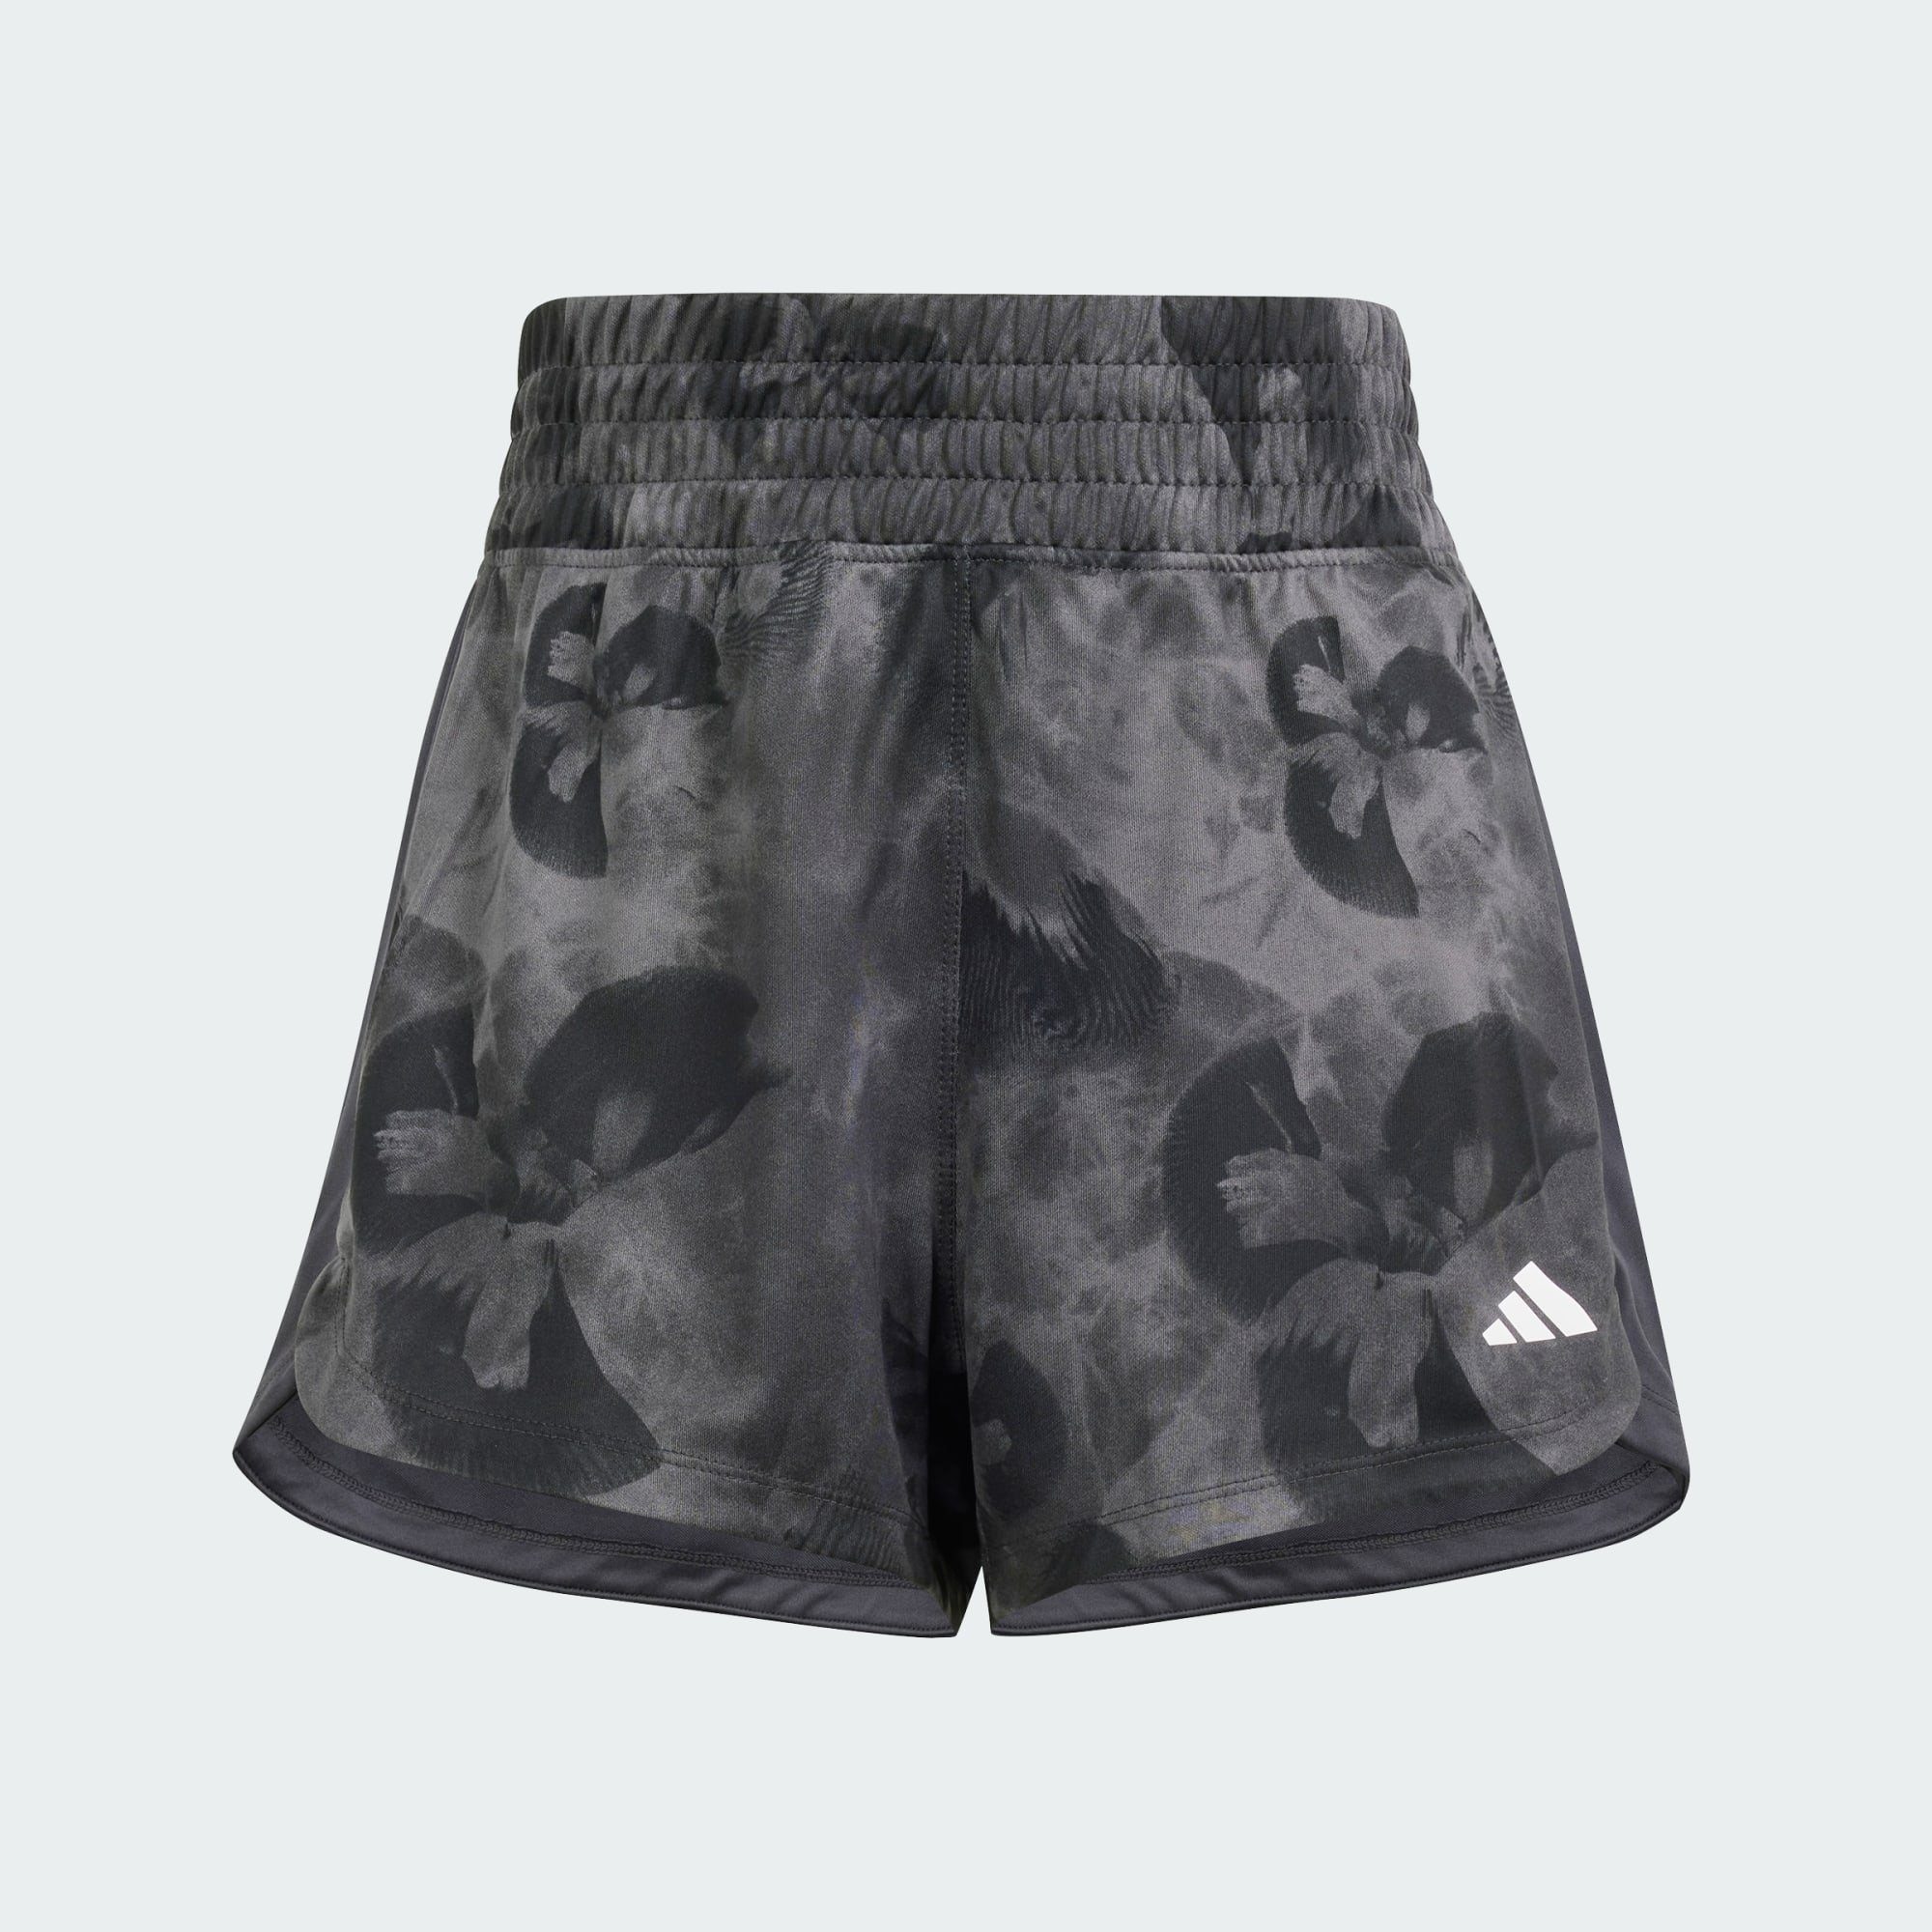 ESSENTIALS Five Grey TIE-DYE KNIT AOP PACER FLOWER Performance SHORTS adidas Funktionsshorts